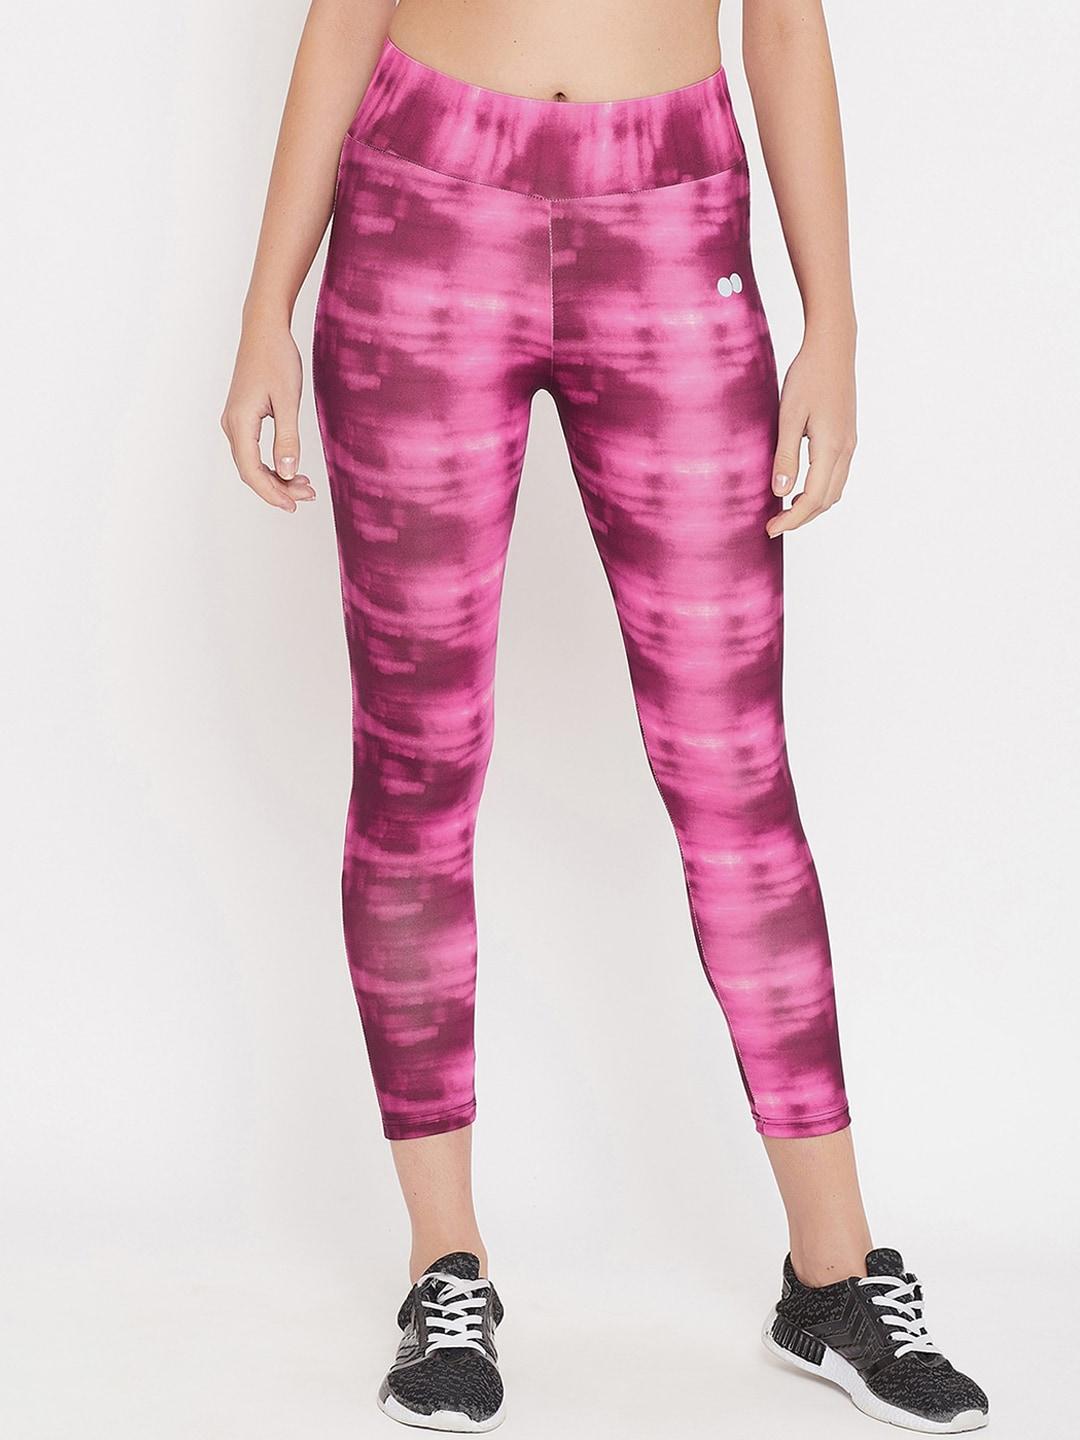 Clovia Women Pink Tie & Dye Printed Activewear Ankle-Length Sports Tights